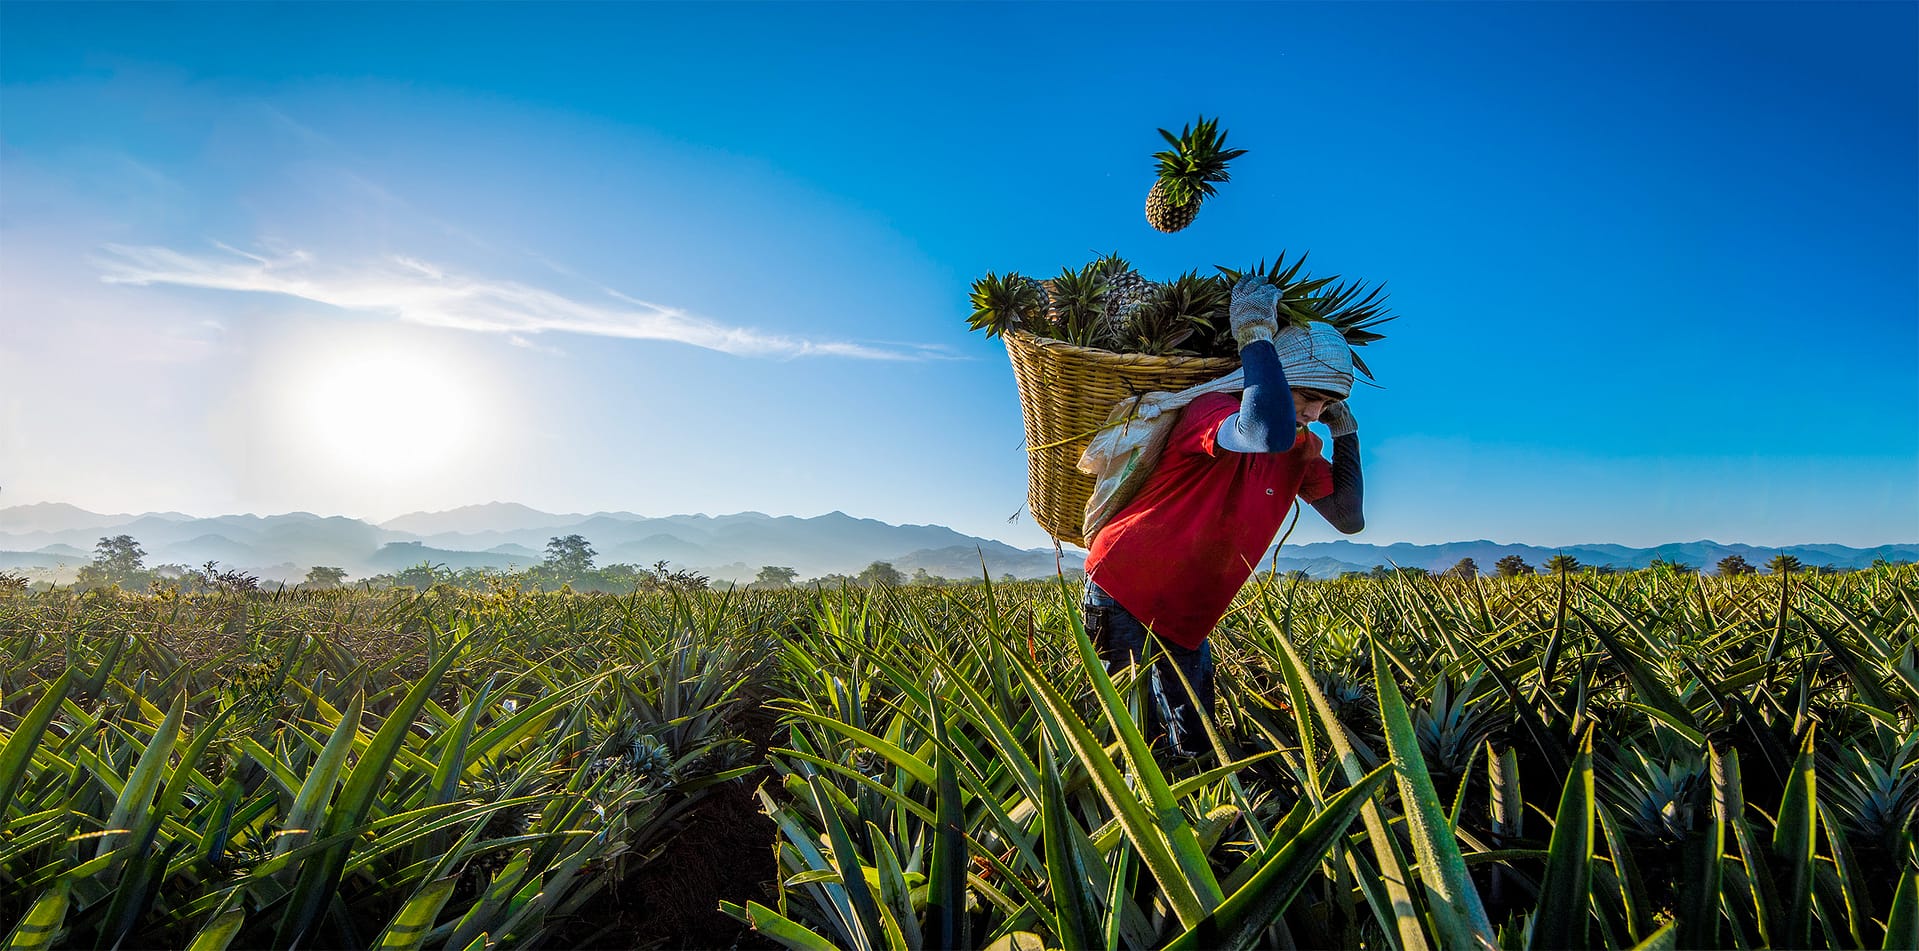 A photograph by Chris Rank of a worker Harvesting Pineapples in a field outside Puerto Vallarta Mexico